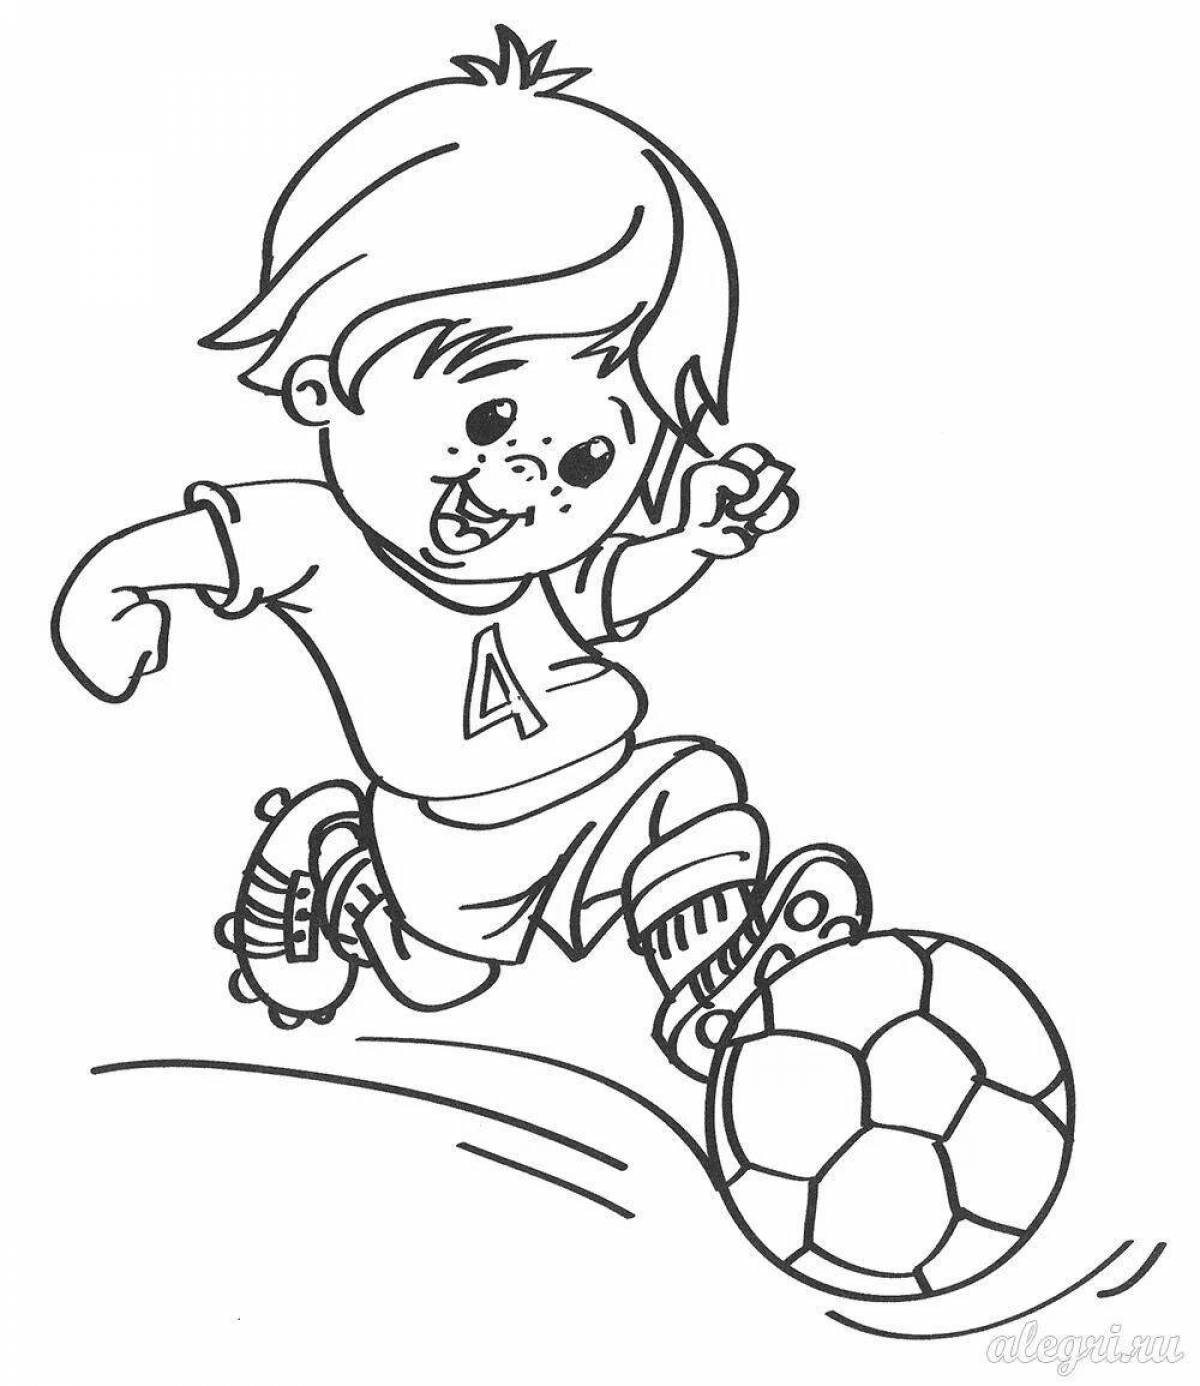 Exciting sports coloring book for 4-5 year olds